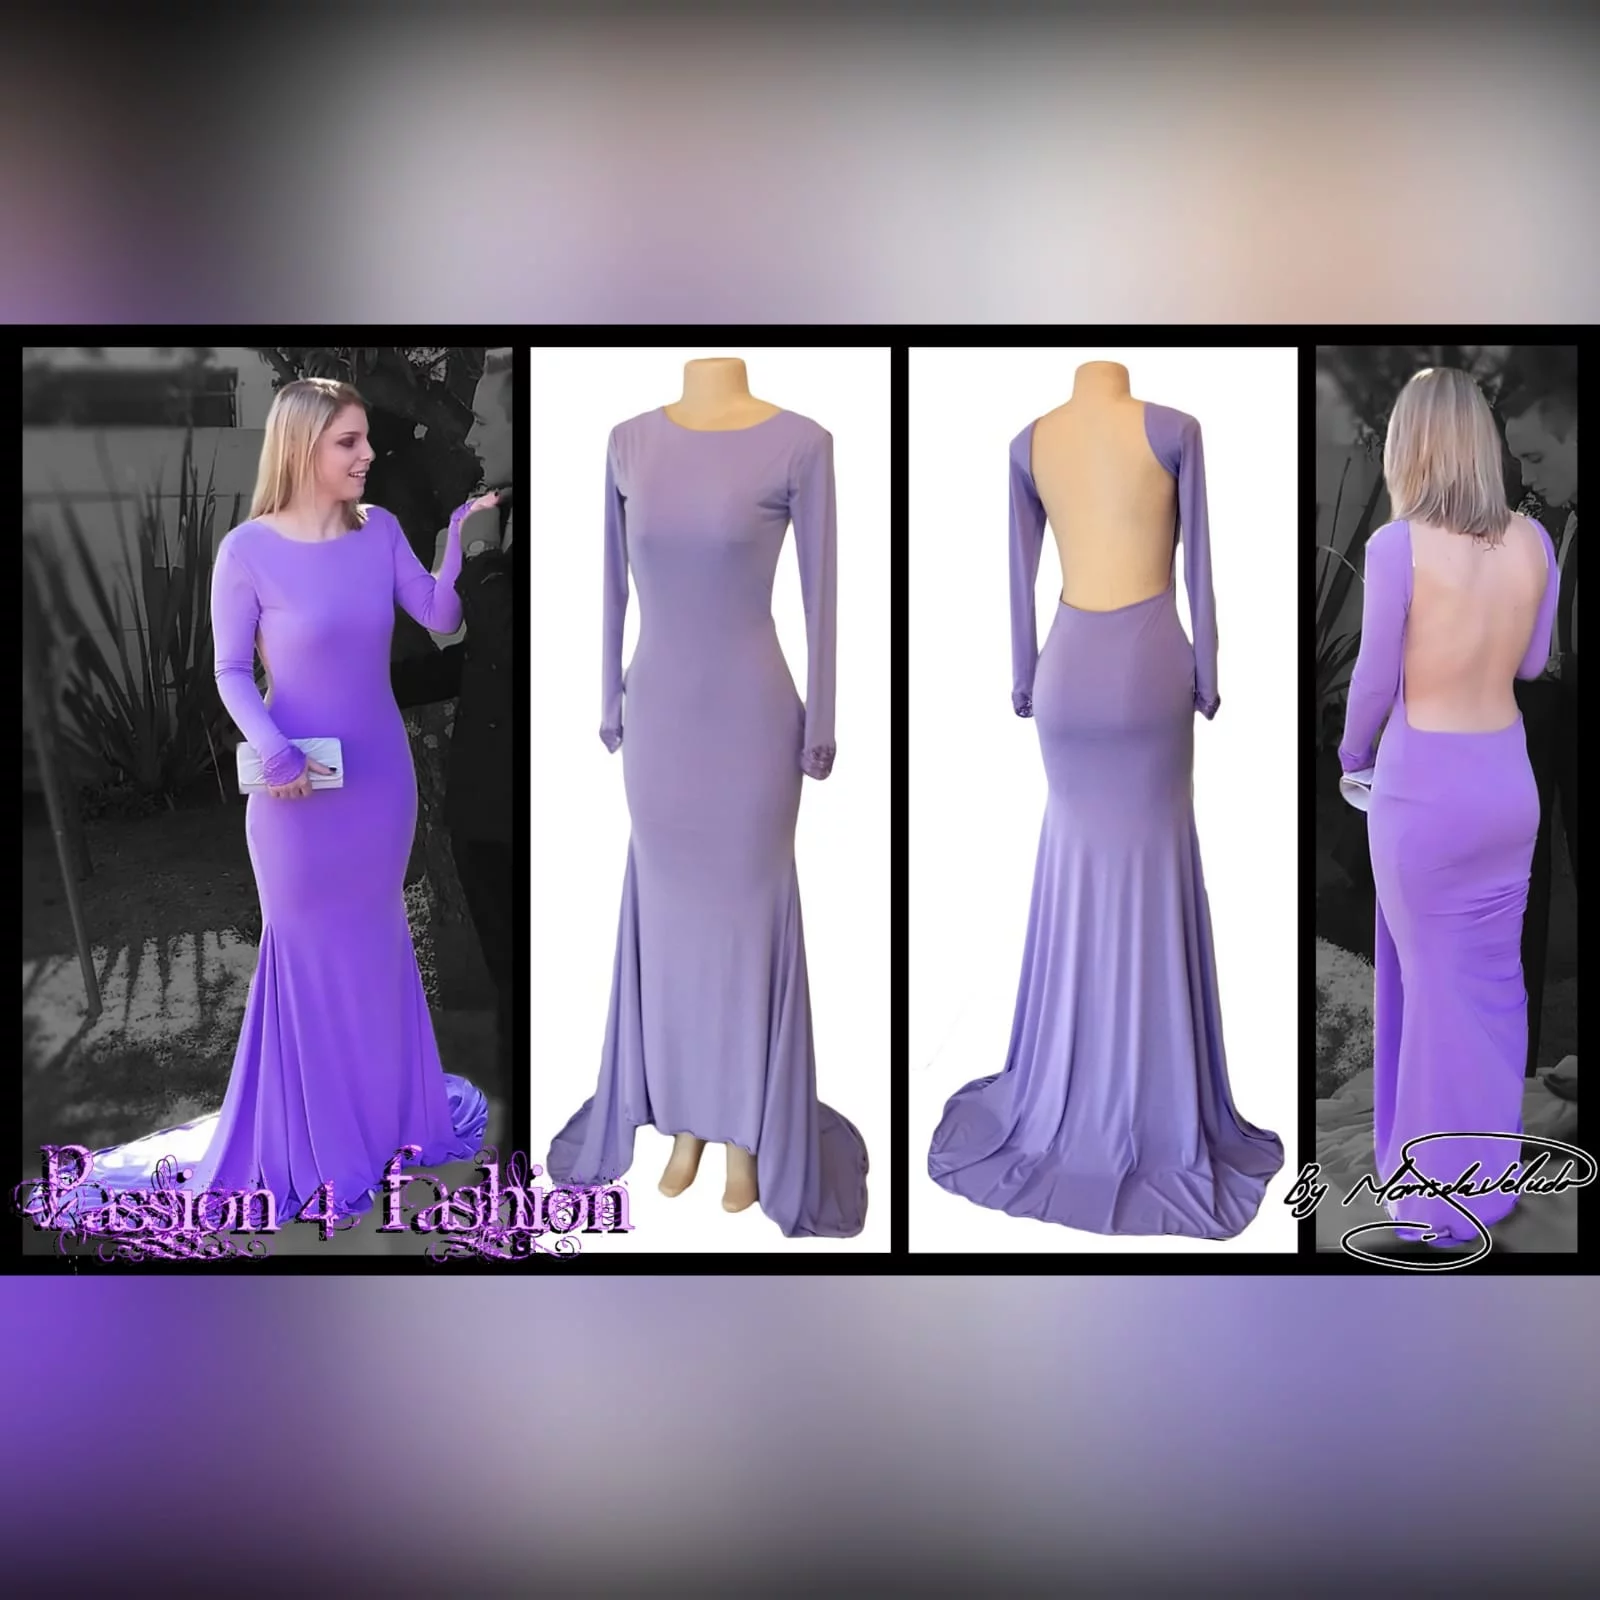 Body fitting lilac soft mermaid matric farewell dress and a jewel neckline 5 body fitting lilac soft memaid matric farewell dress and a jewel neckline. Low open square back. With a train and long sleeves. Sleeves finished with lace.